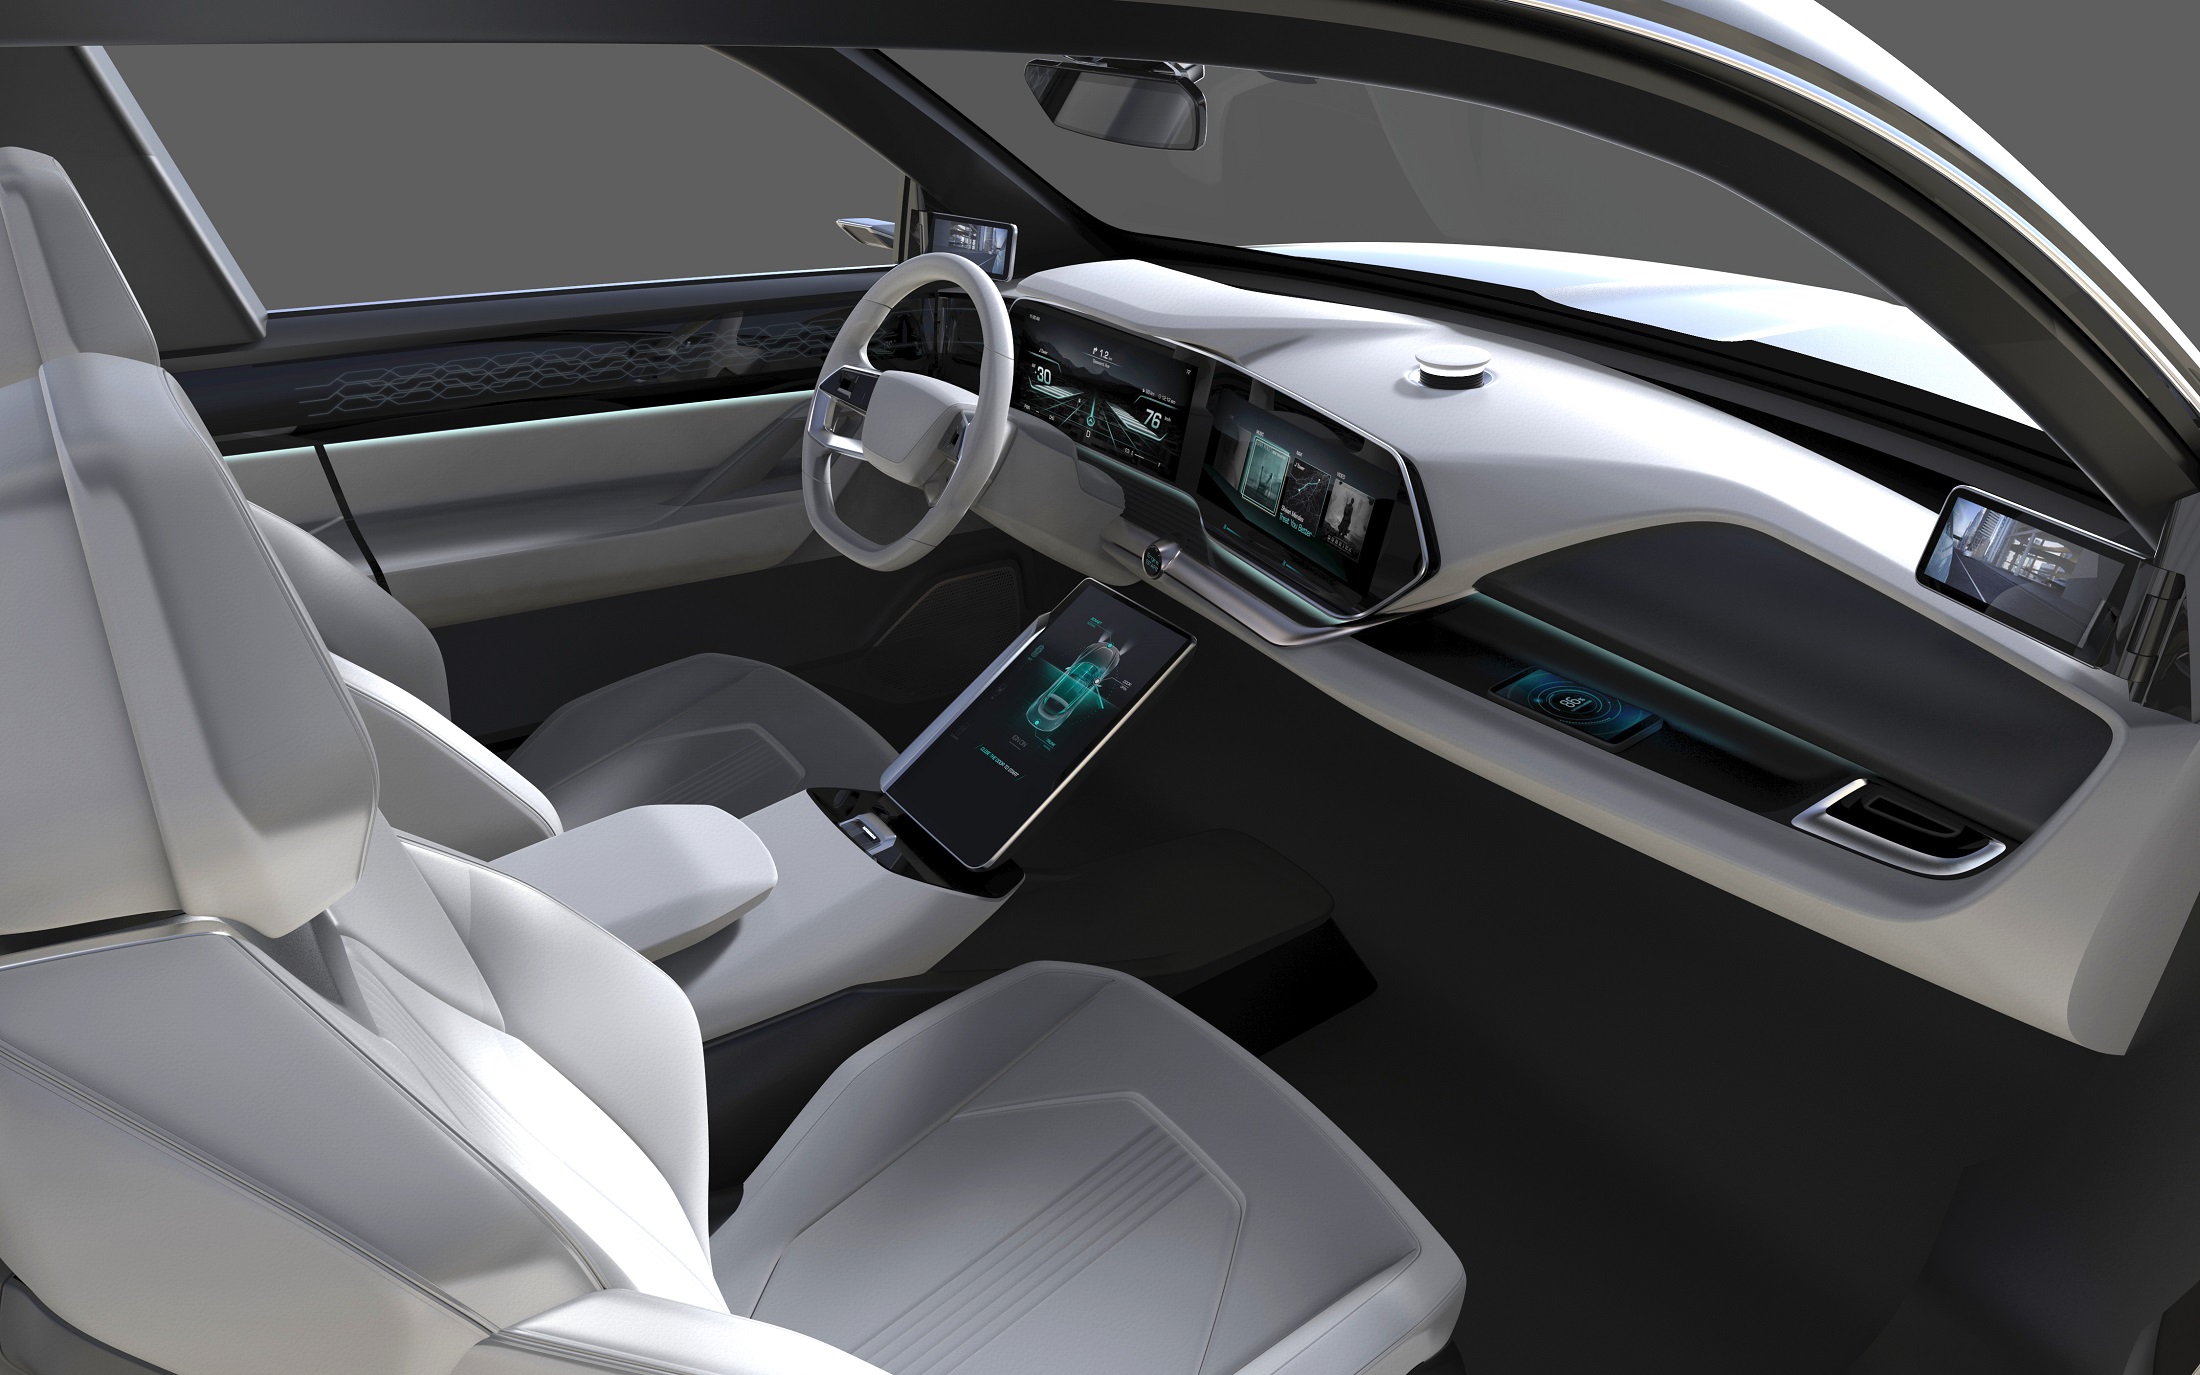 Inside the vehicle equipped with in-vehicle infotainment system